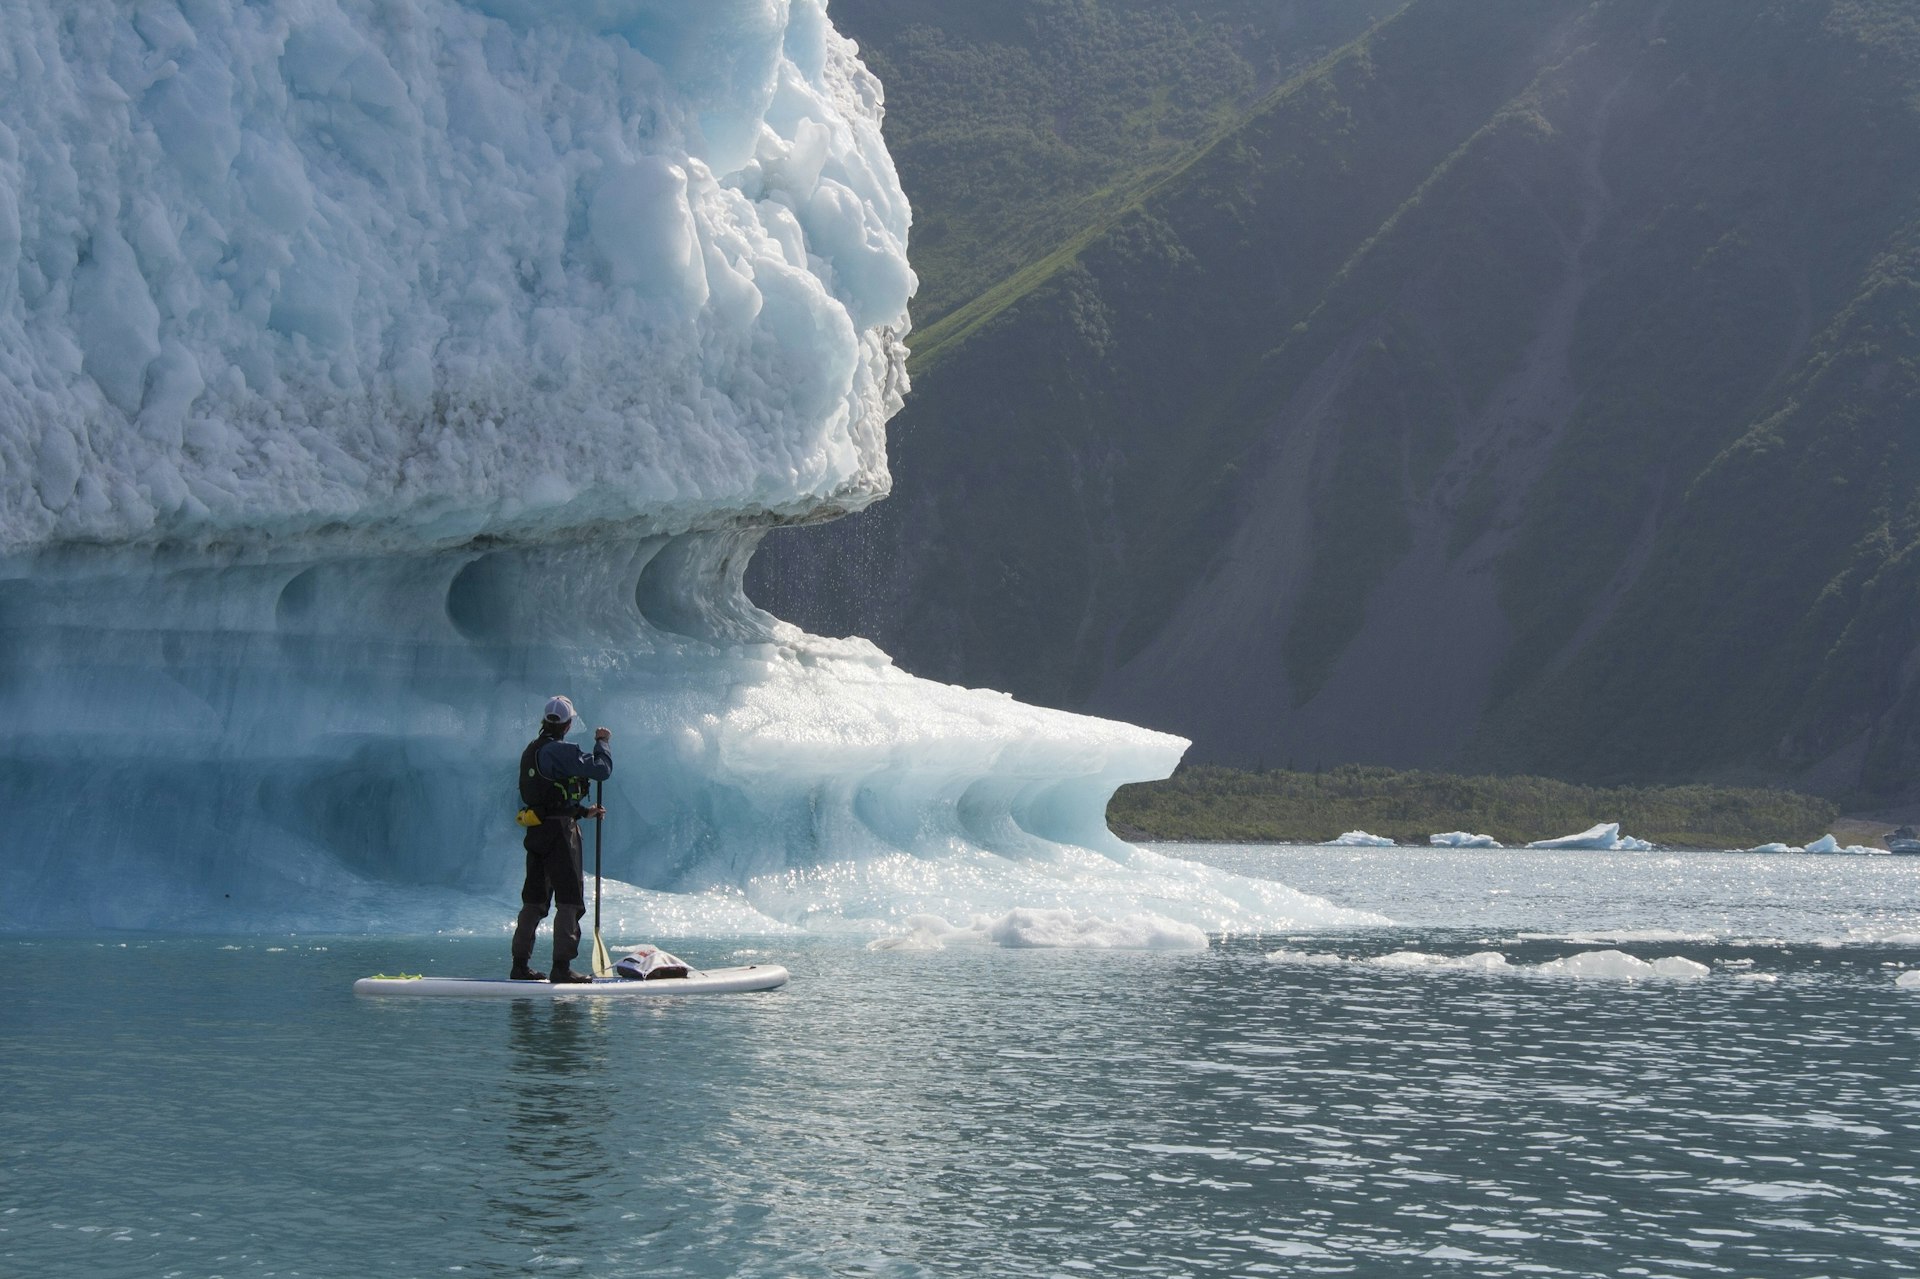 A man stands on a paddleboard in still water. A huge iceberg, white with a blueish tinge, towers over him.